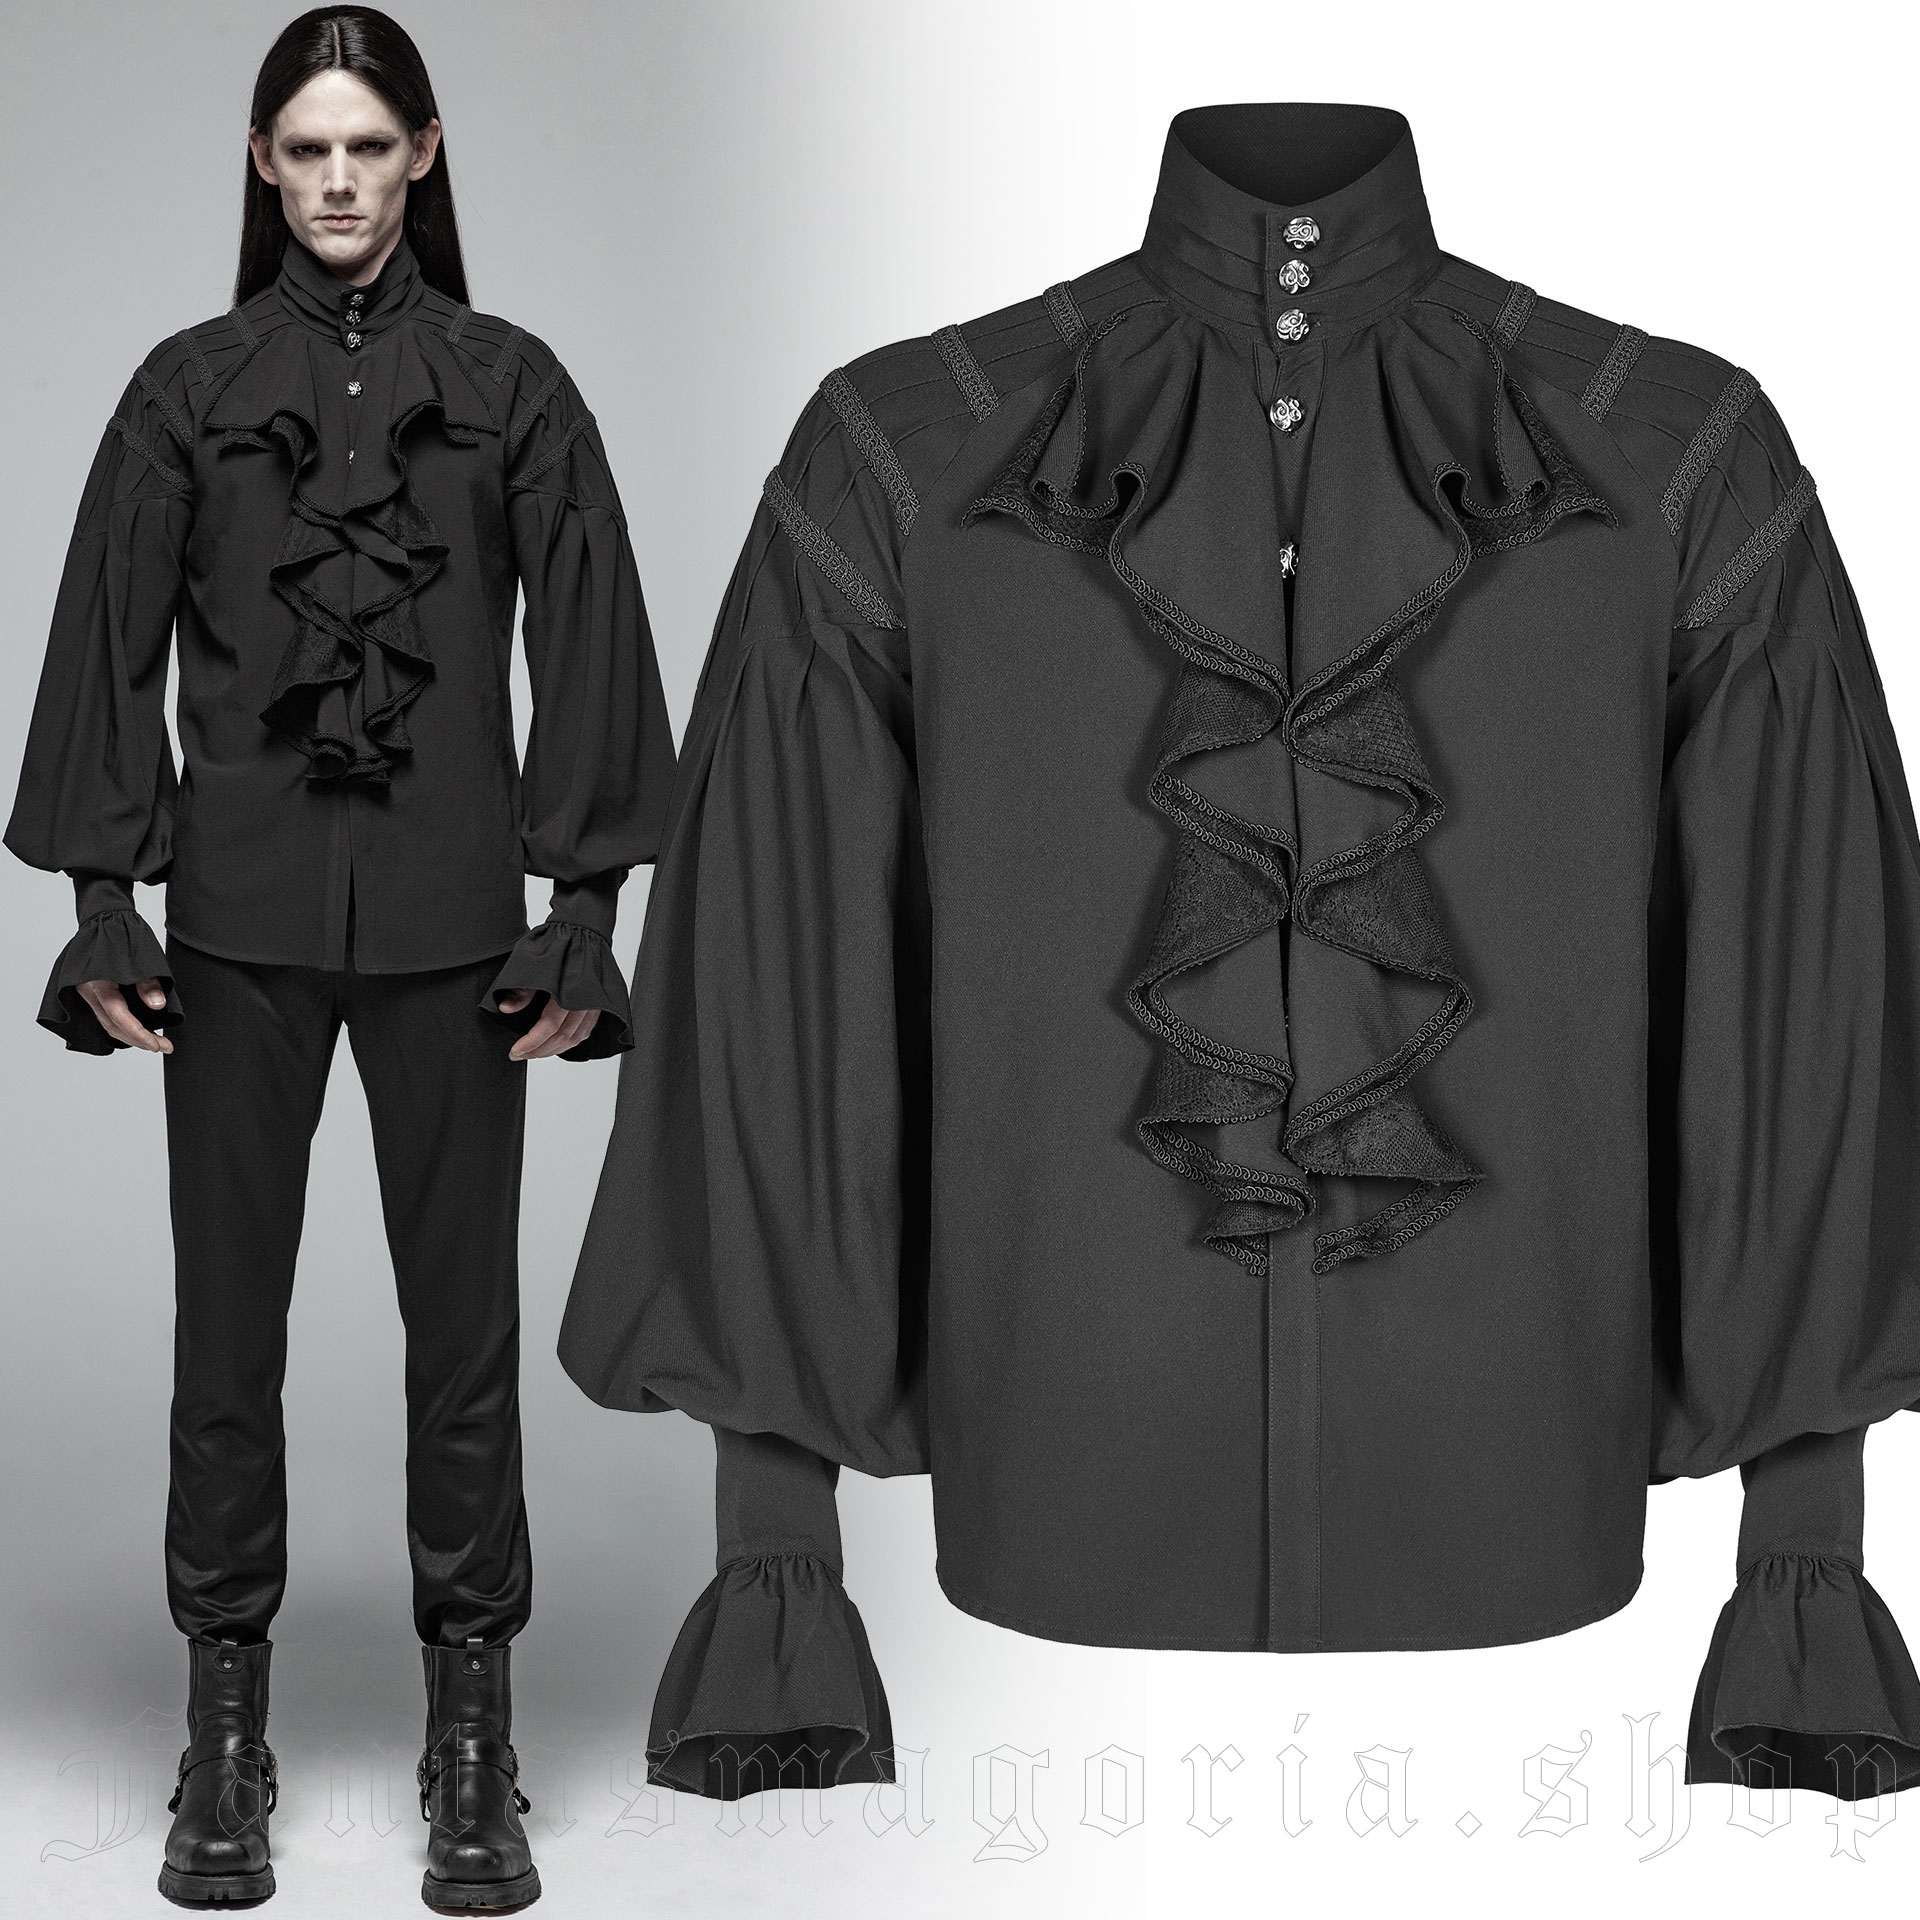 Long-sleeved shirt with jabot style collar by Punk Rave.. Punk